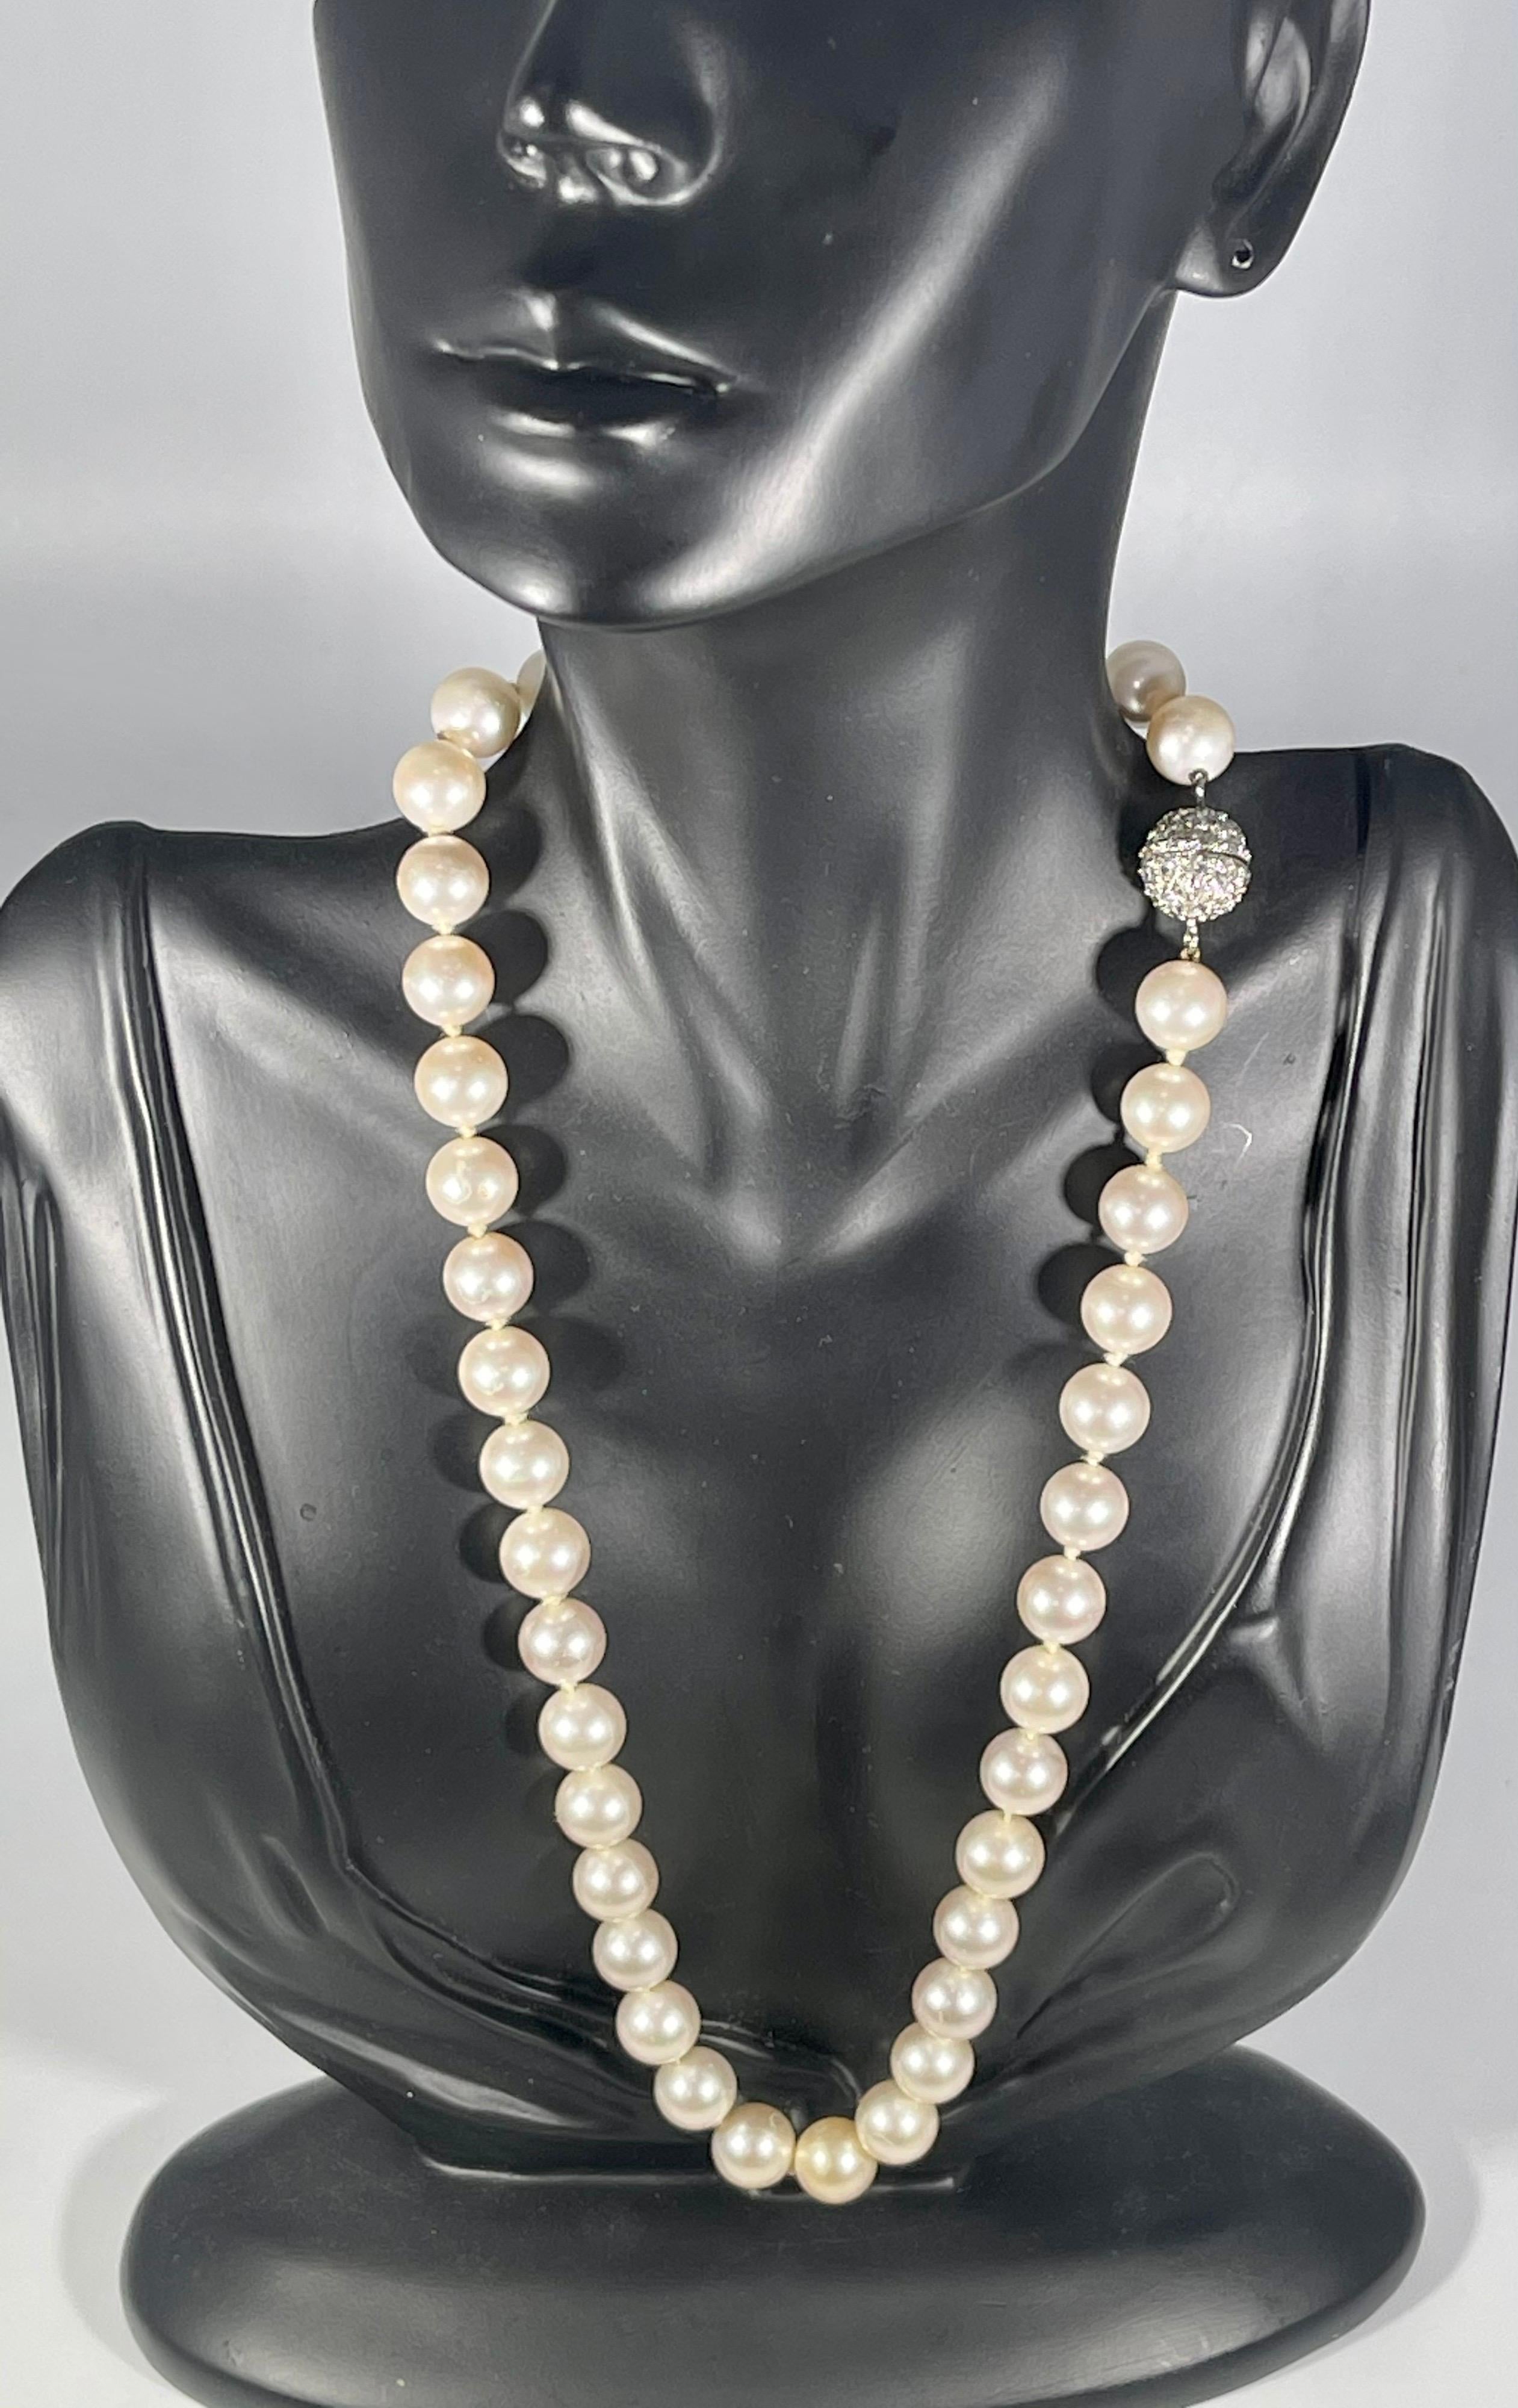 41 Round Akoya Pearls Strand Necklace Set in Metal Ball Clasp For Sale 1